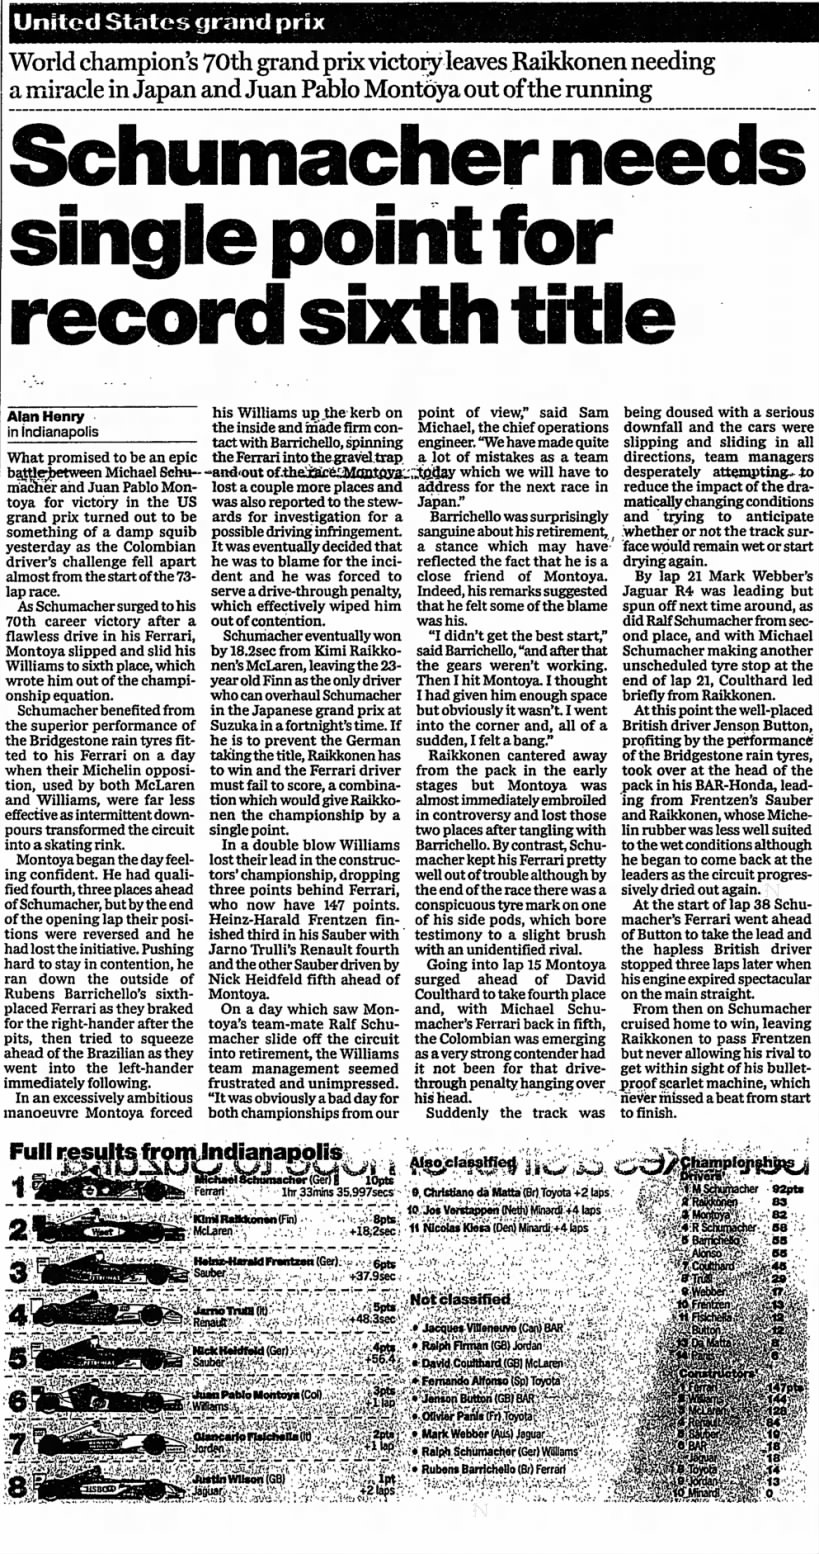 2003 US GP Report - The Guardian - 29 September 2003 - Page S16